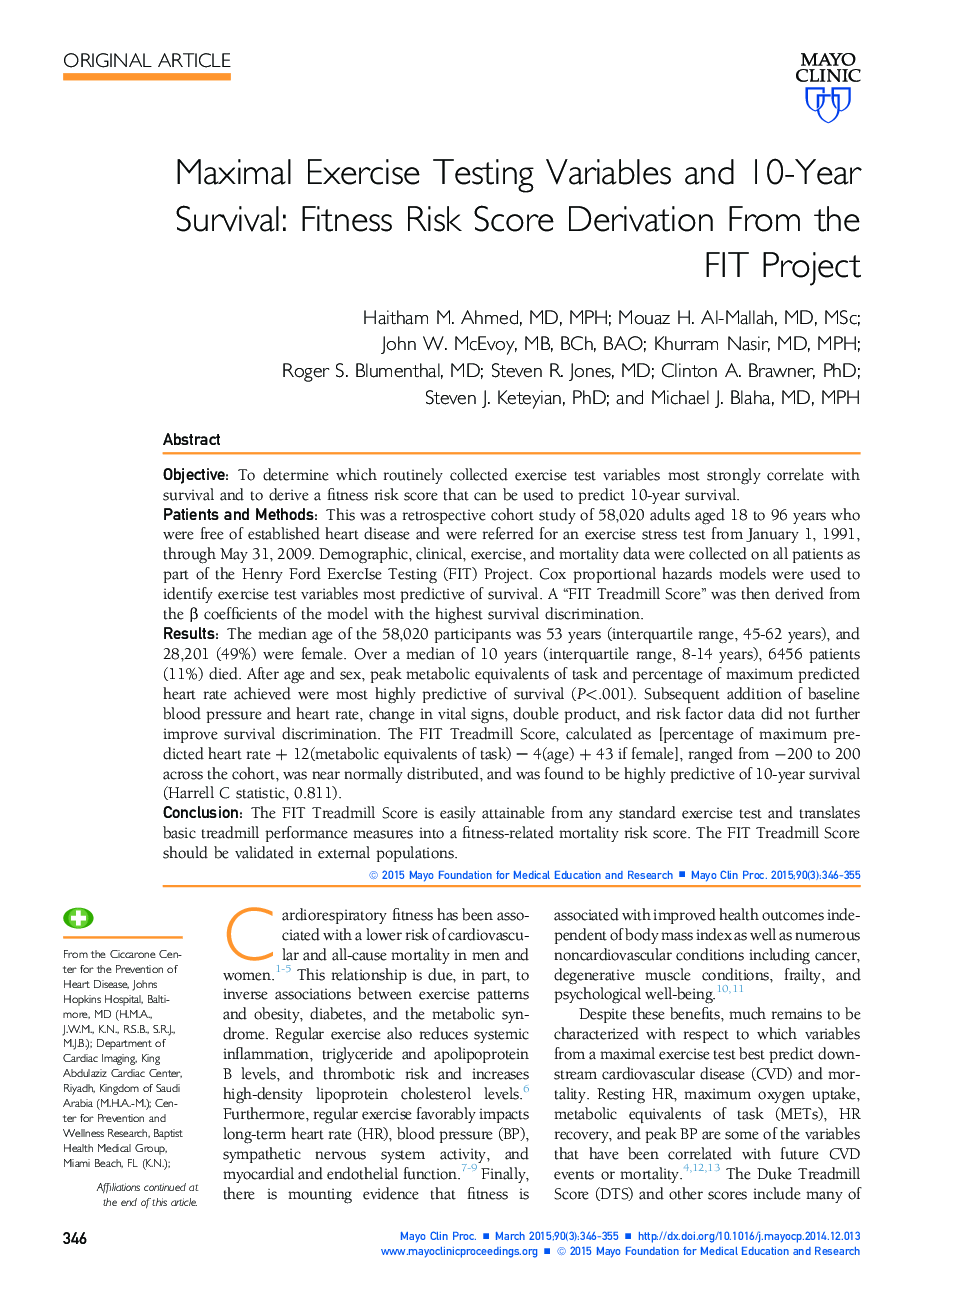 Maximal Exercise Testing Variables and 10-Year Survival: Fitness Risk Score Derivation From the FIT Project